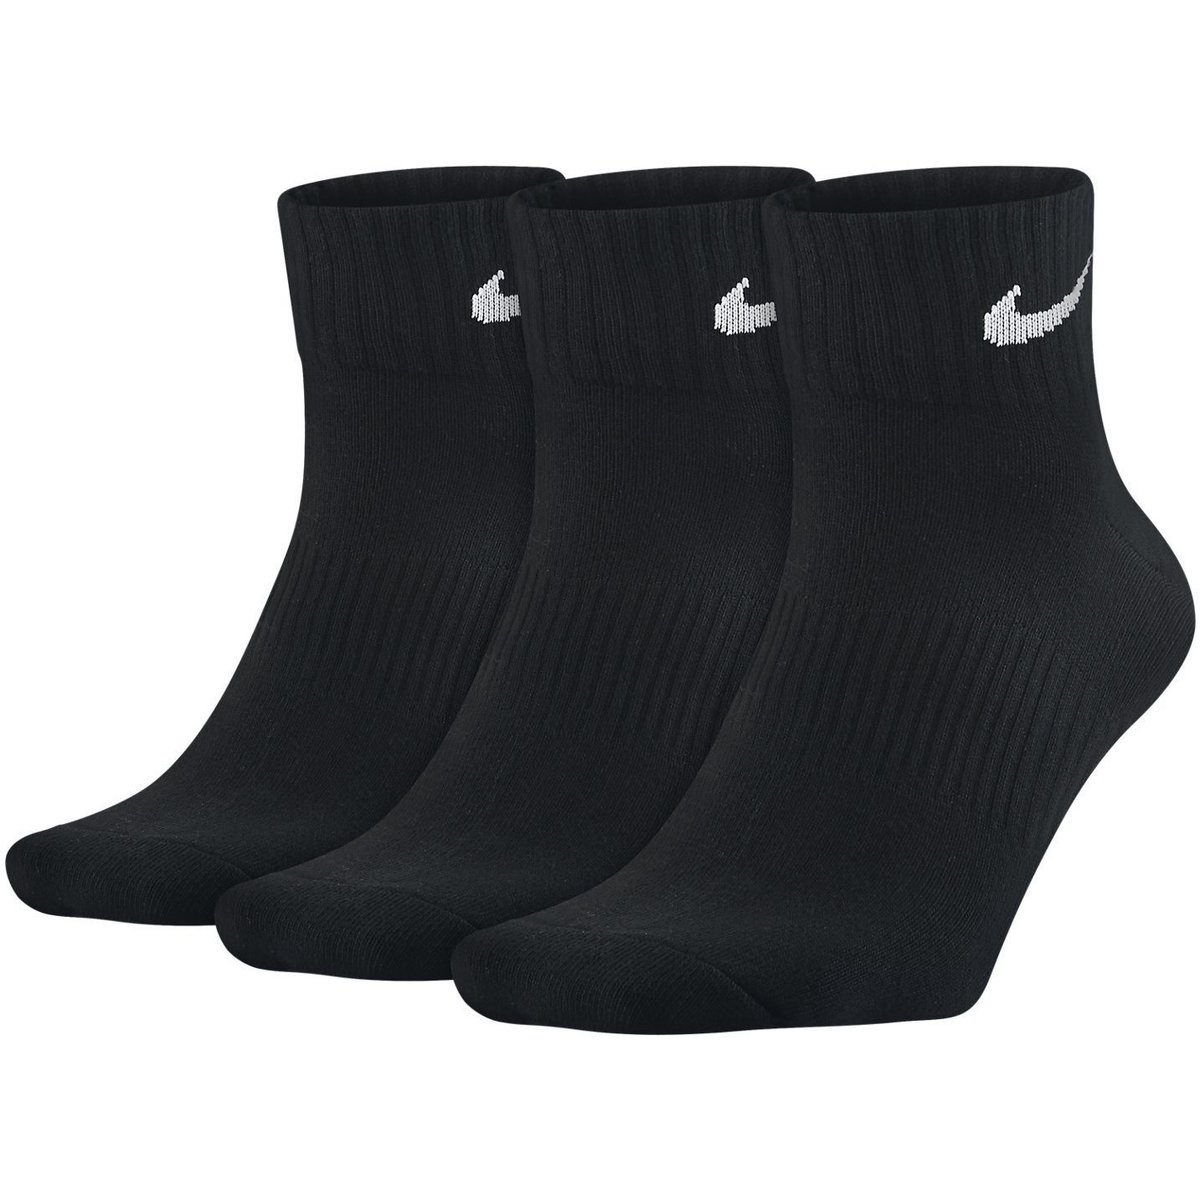 Nike Noir Chaussettes Ankle 3 Paires 2XKr1Wtp